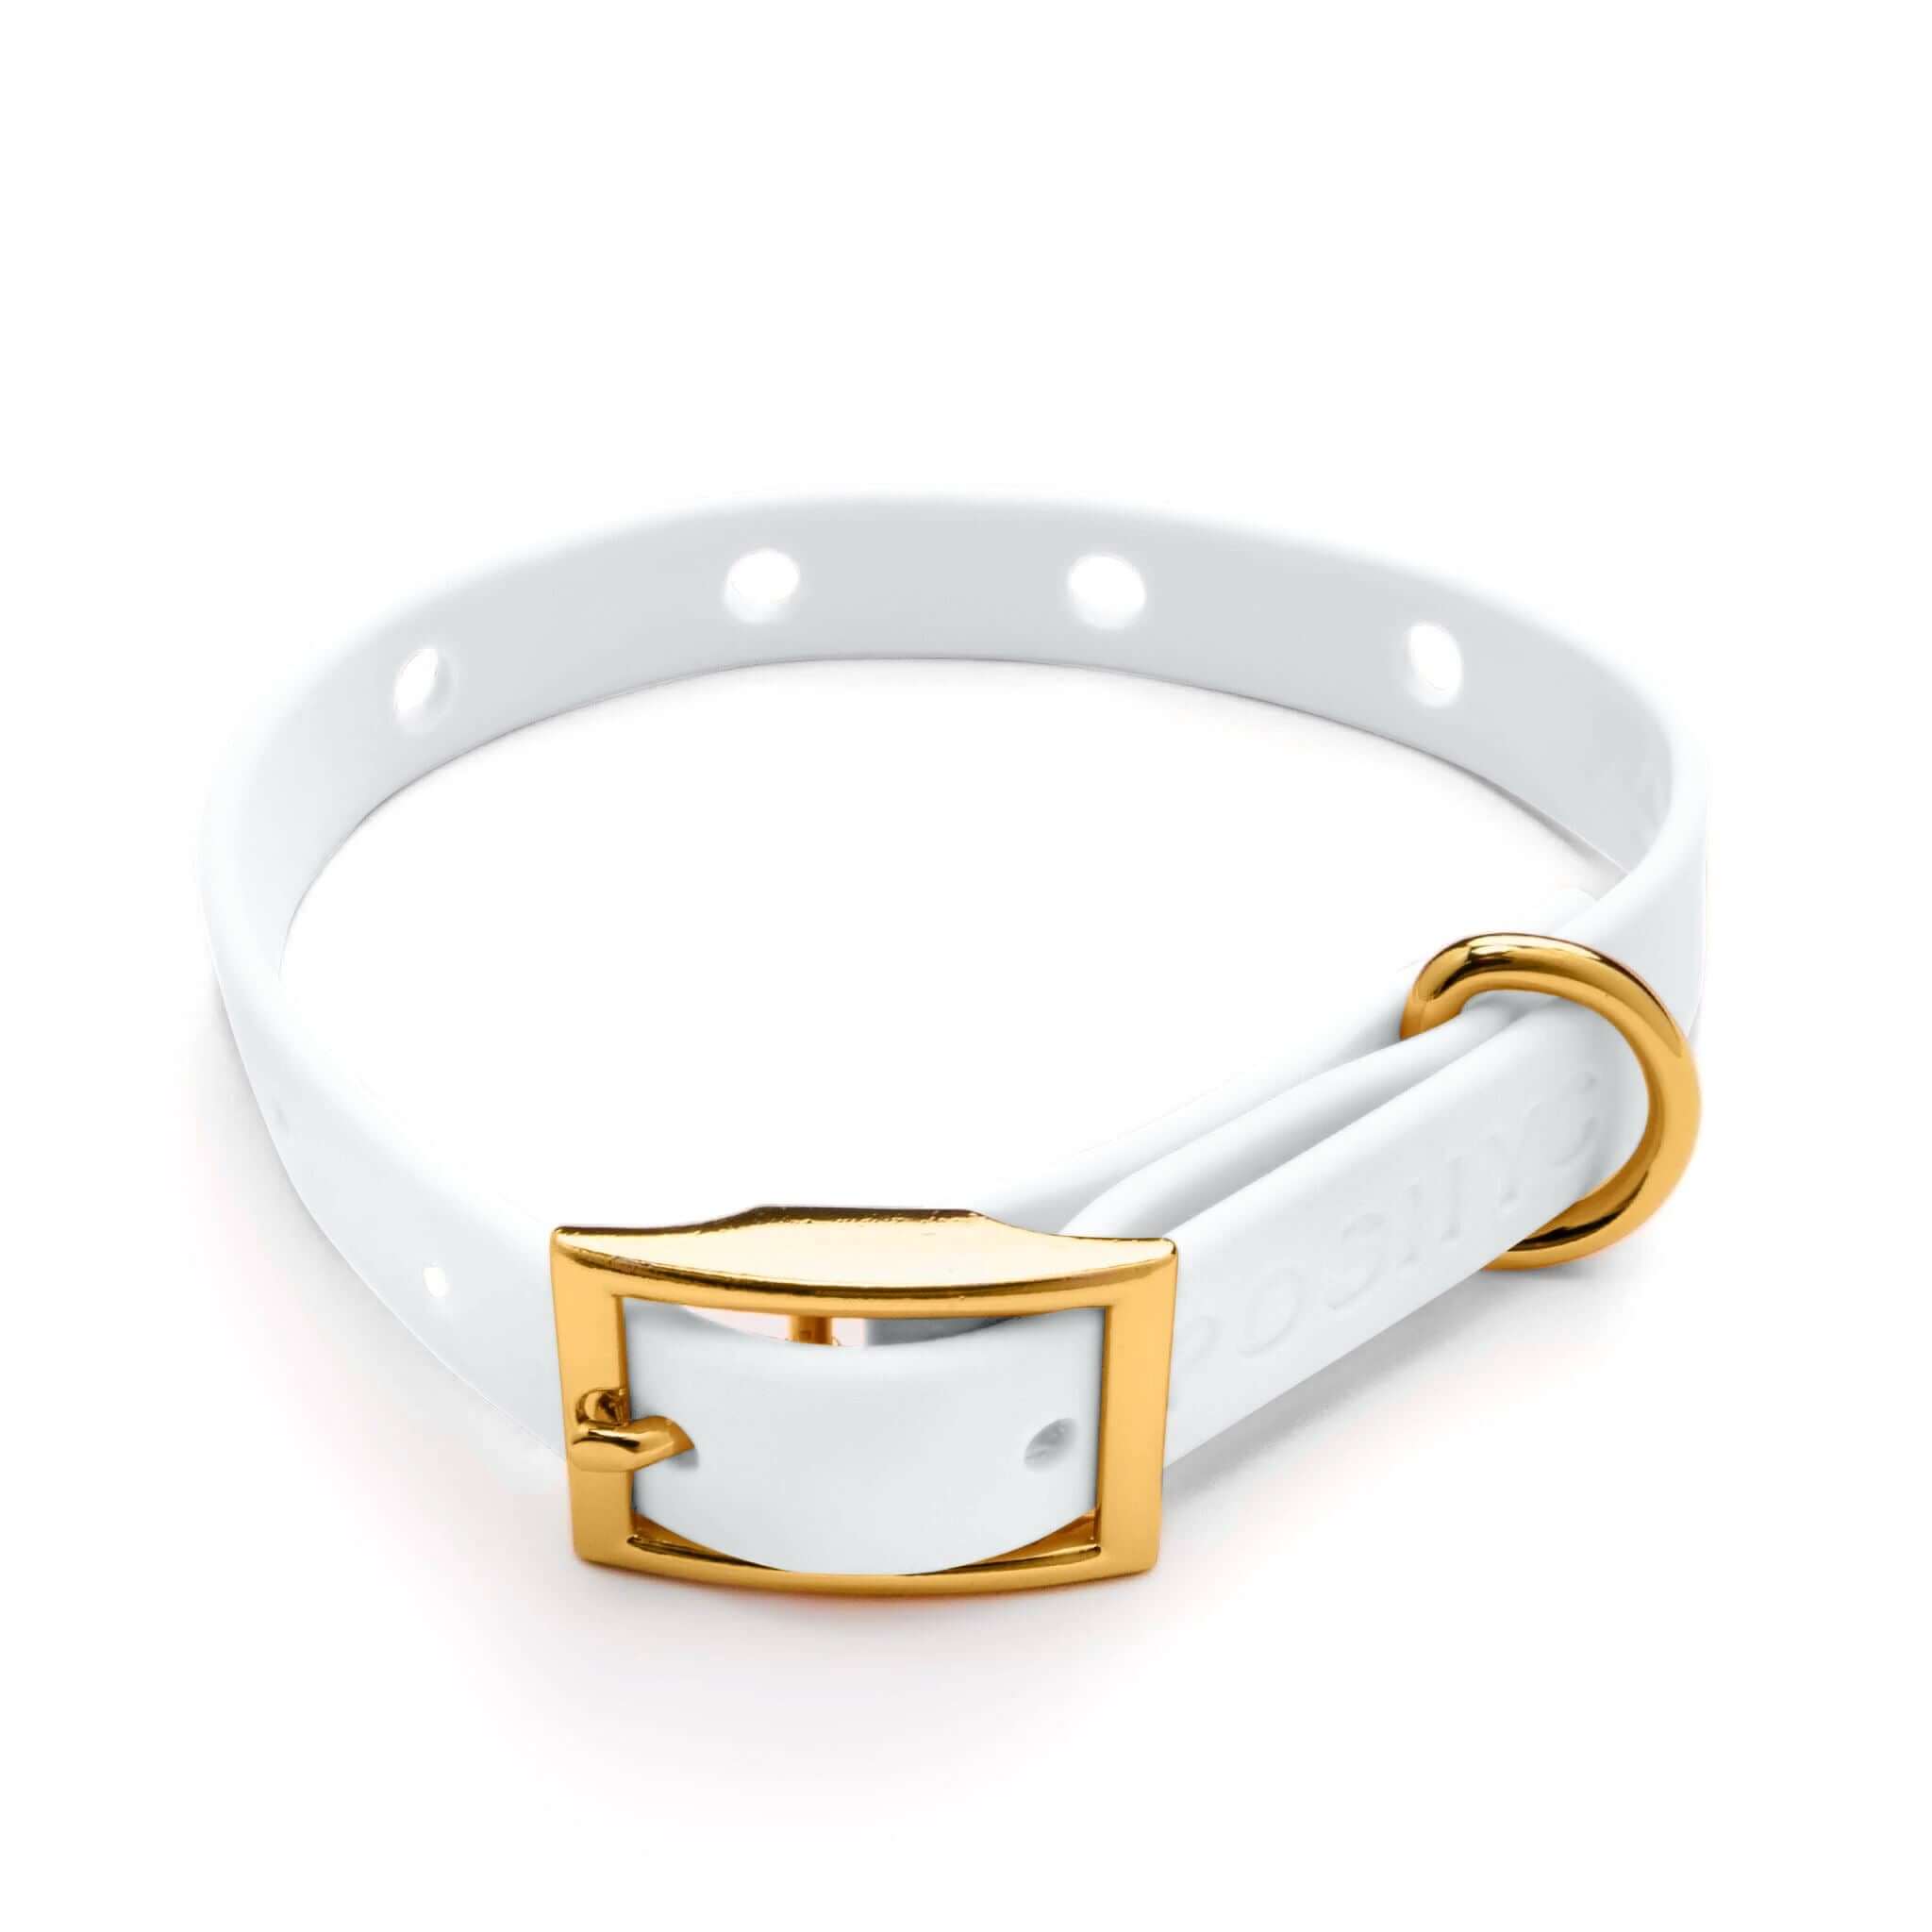 ClipUp Collar for pets white - Style and Function | POSHYC